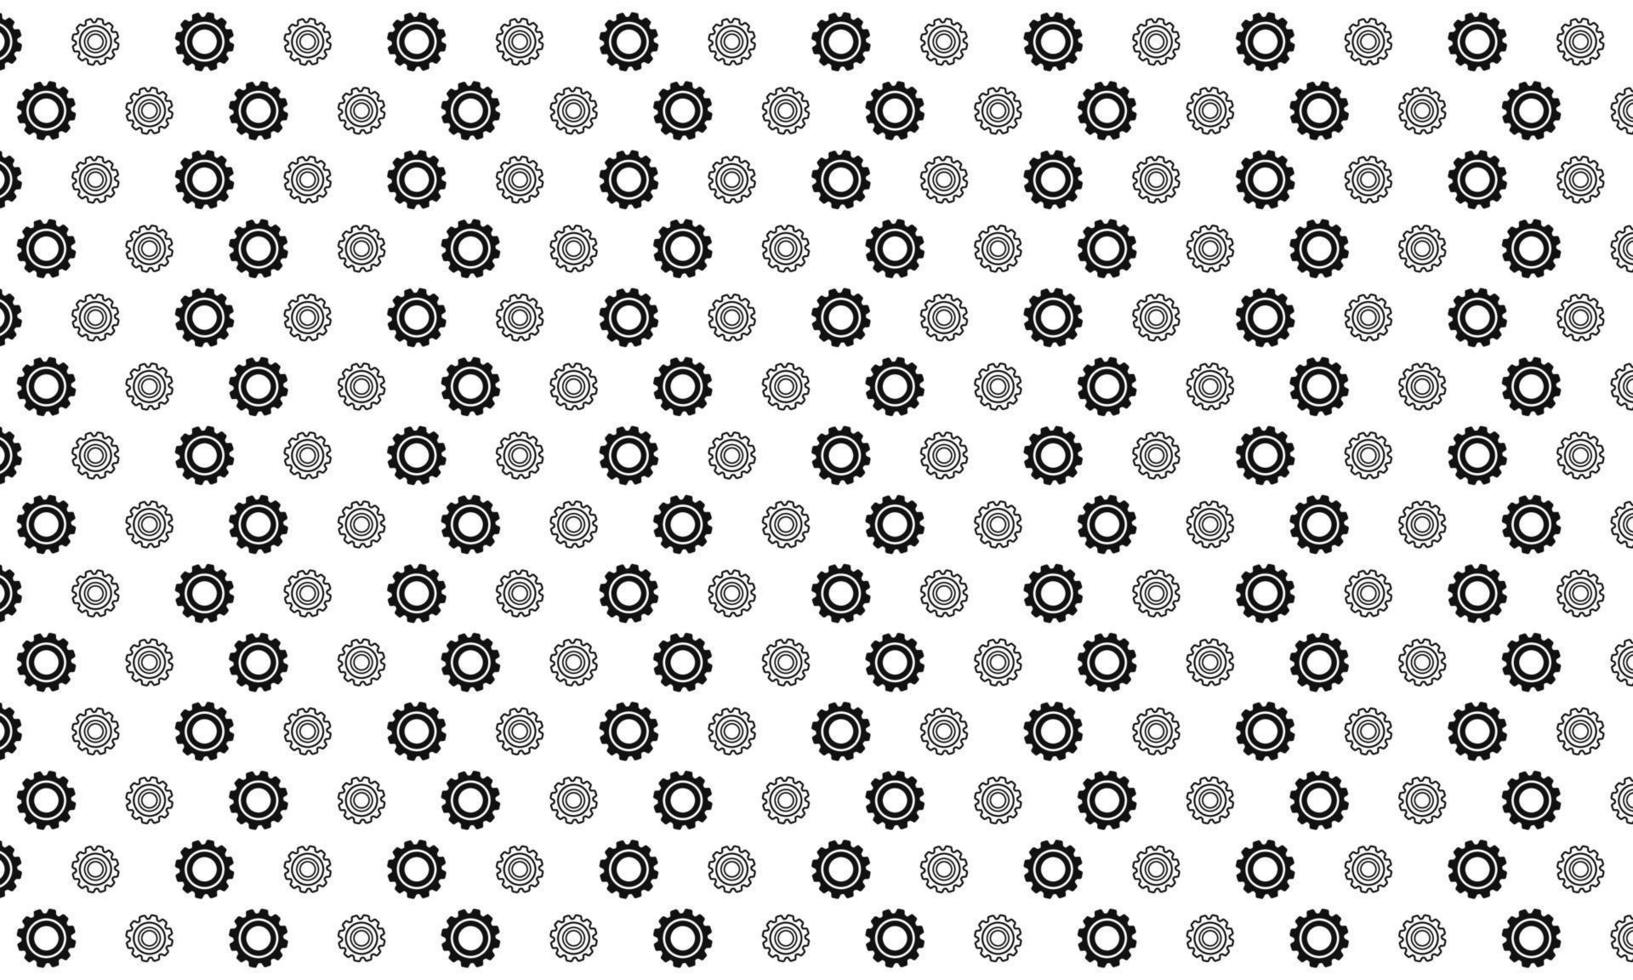 Black and White Gears Seamless Pattern vector